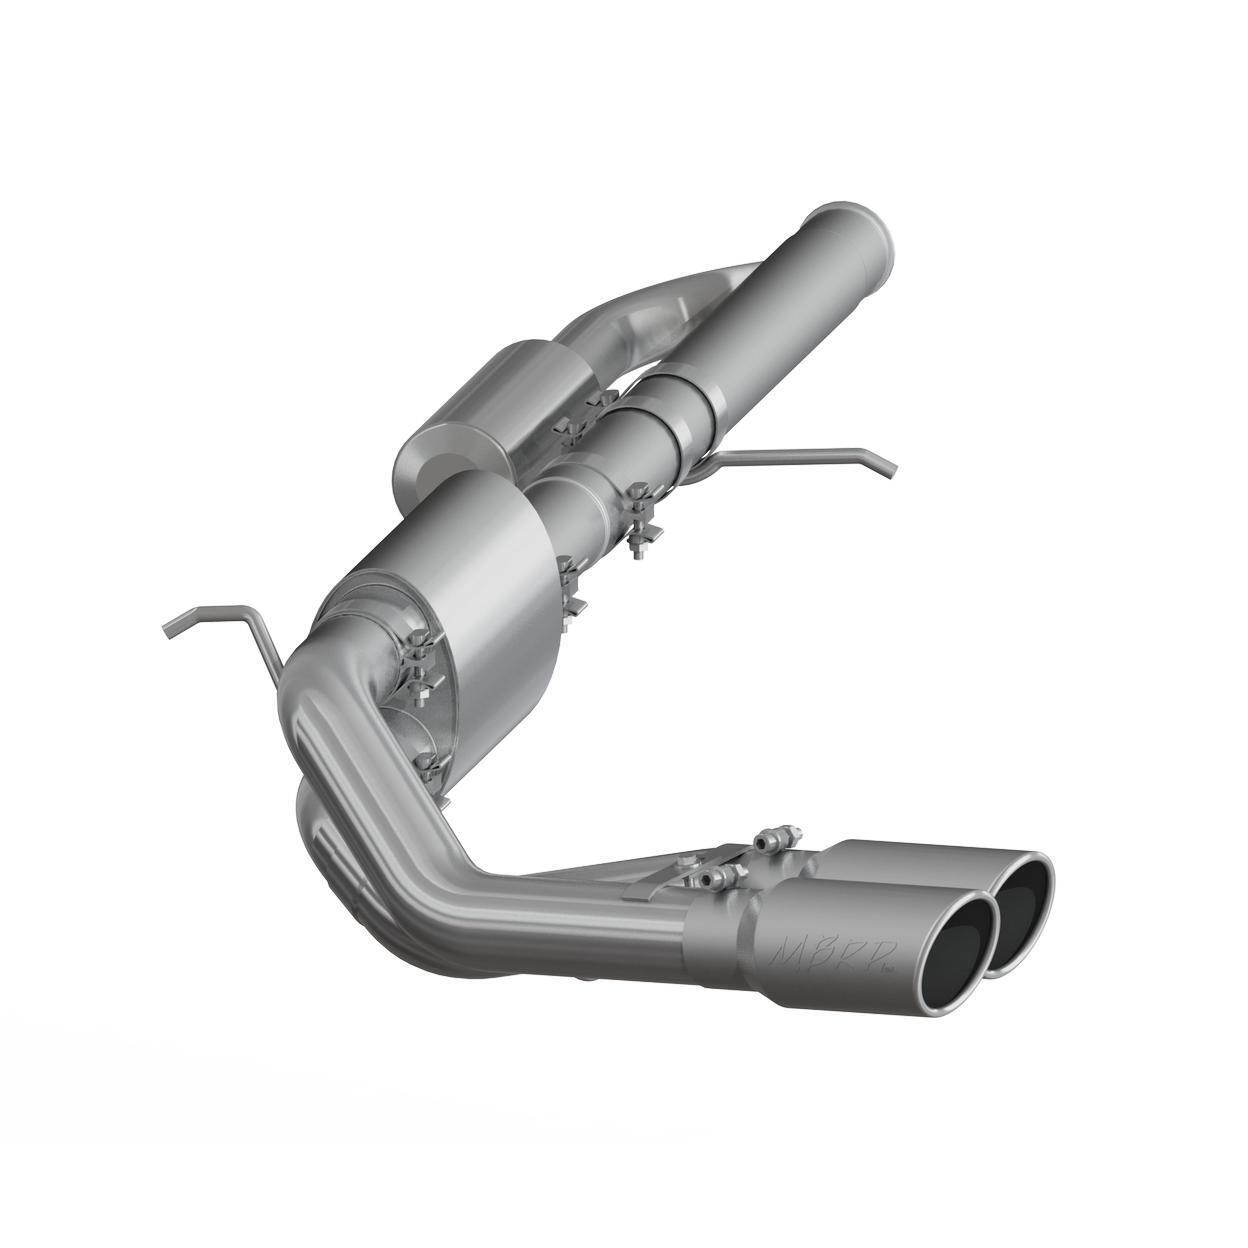 MBRP S5081409-ZL Exhaust System Kit Fits 2009-2012 GMC Sierra 1500 SLE